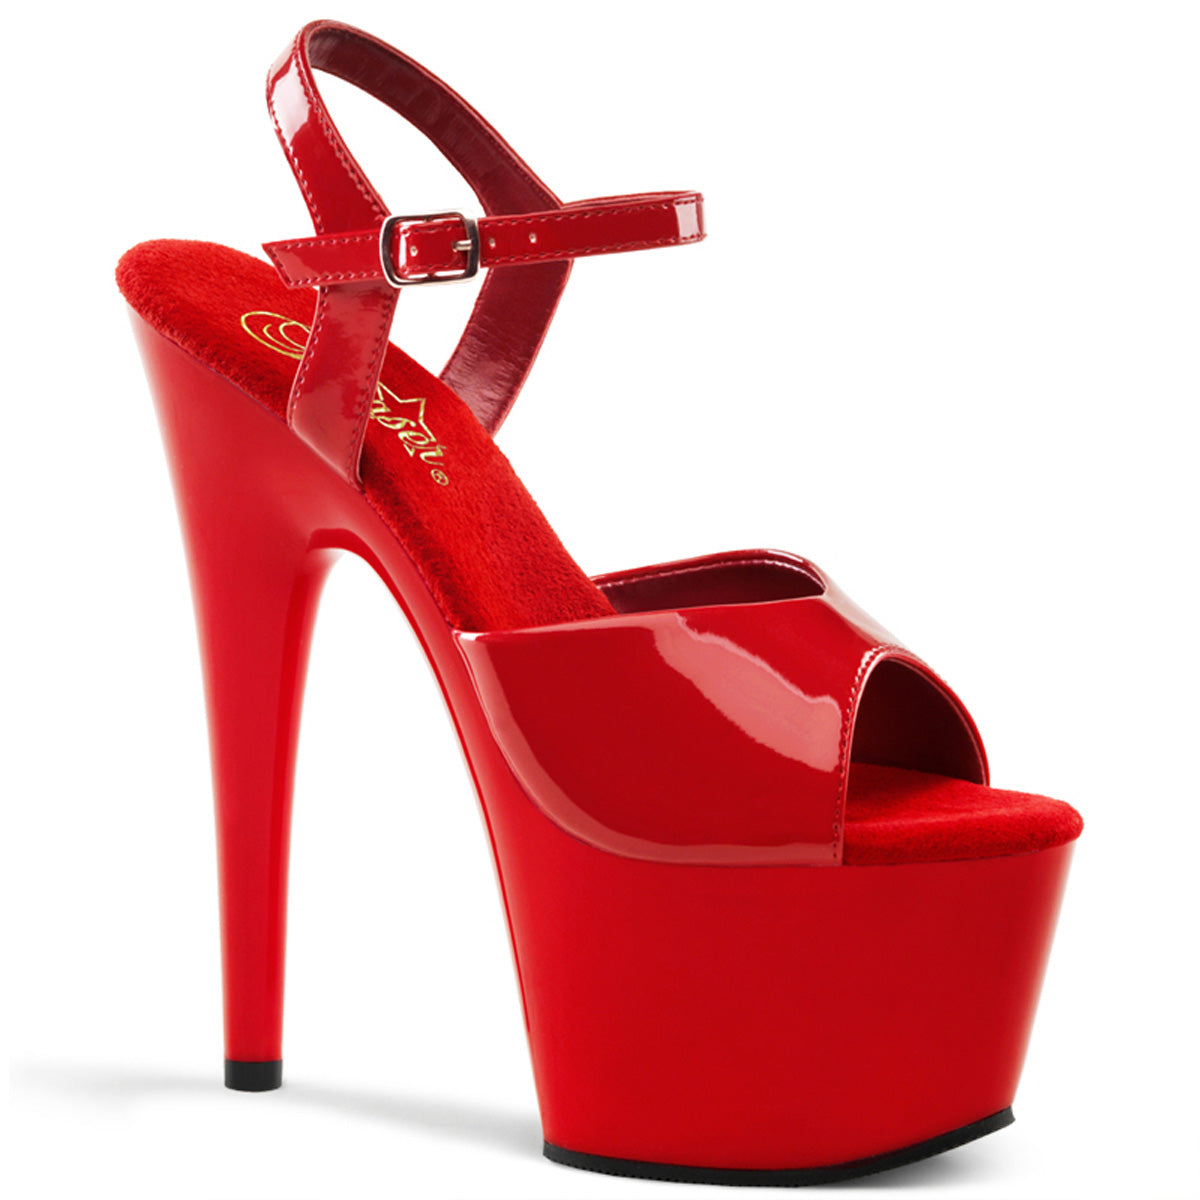 ADORE-709 Exotic Dancing Shoes Strippers Shoes for Pole Dancing